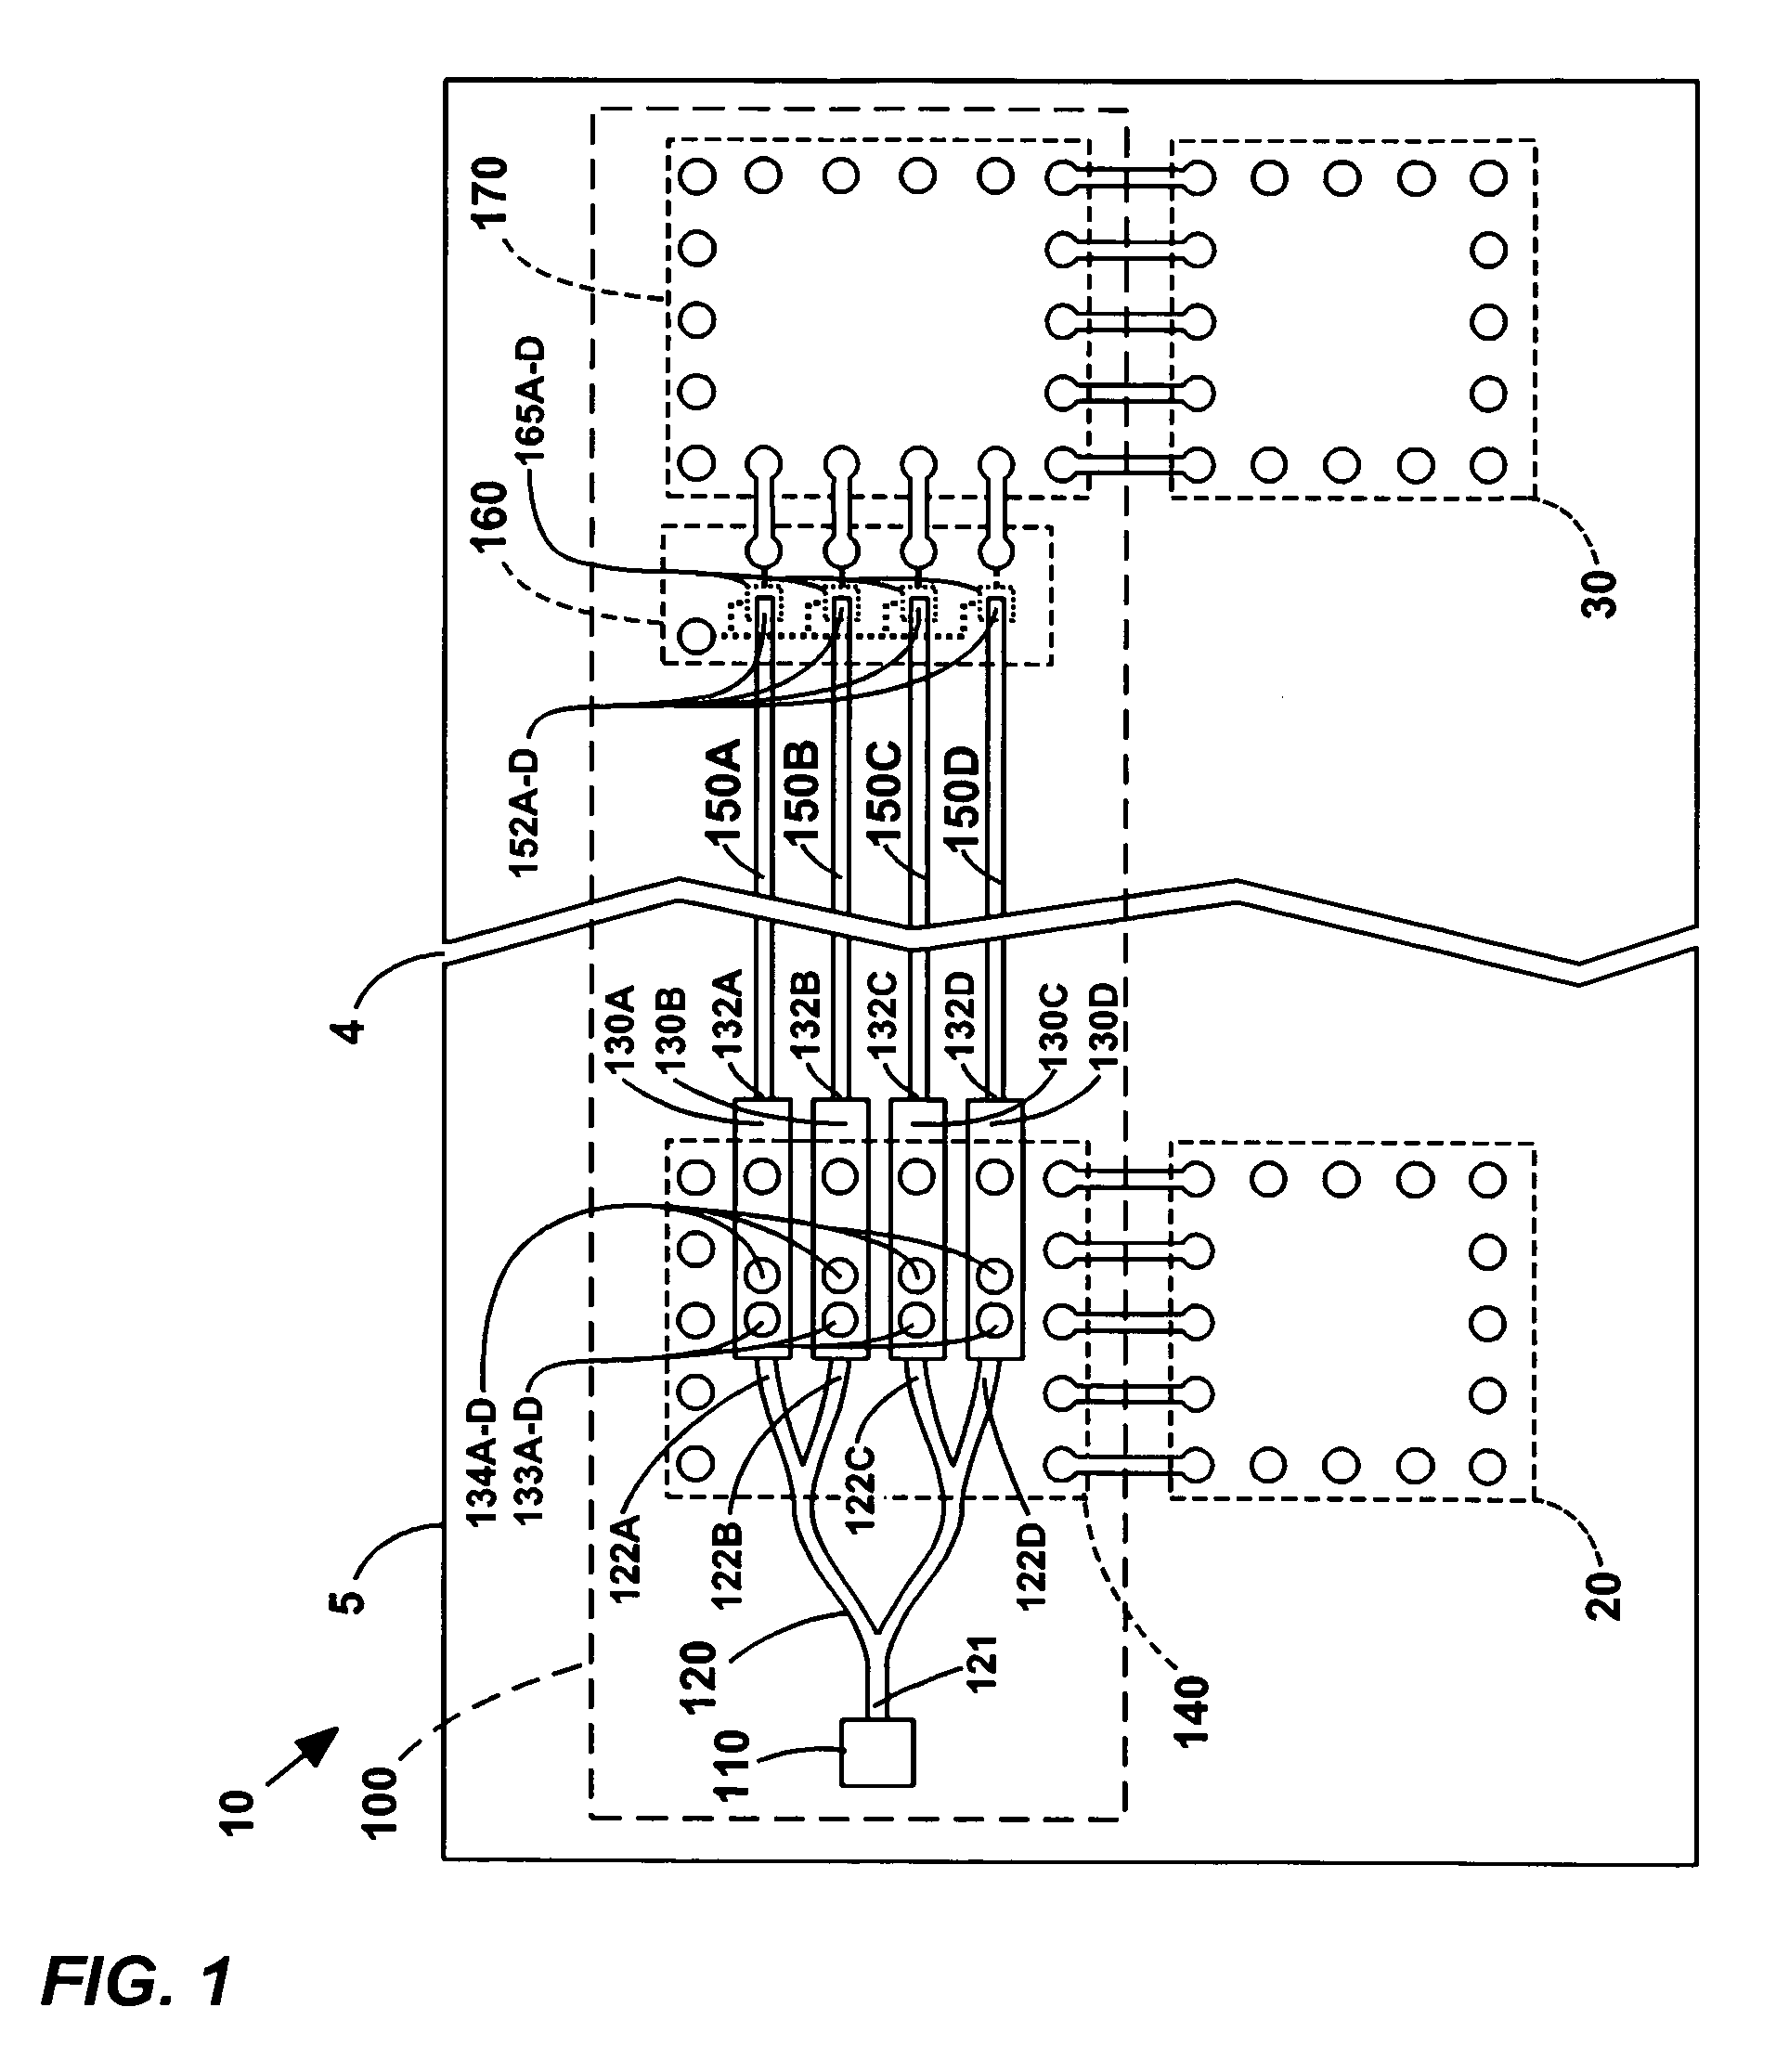 Optical interconnect apparatuses and electro-optic modulators for processing systems